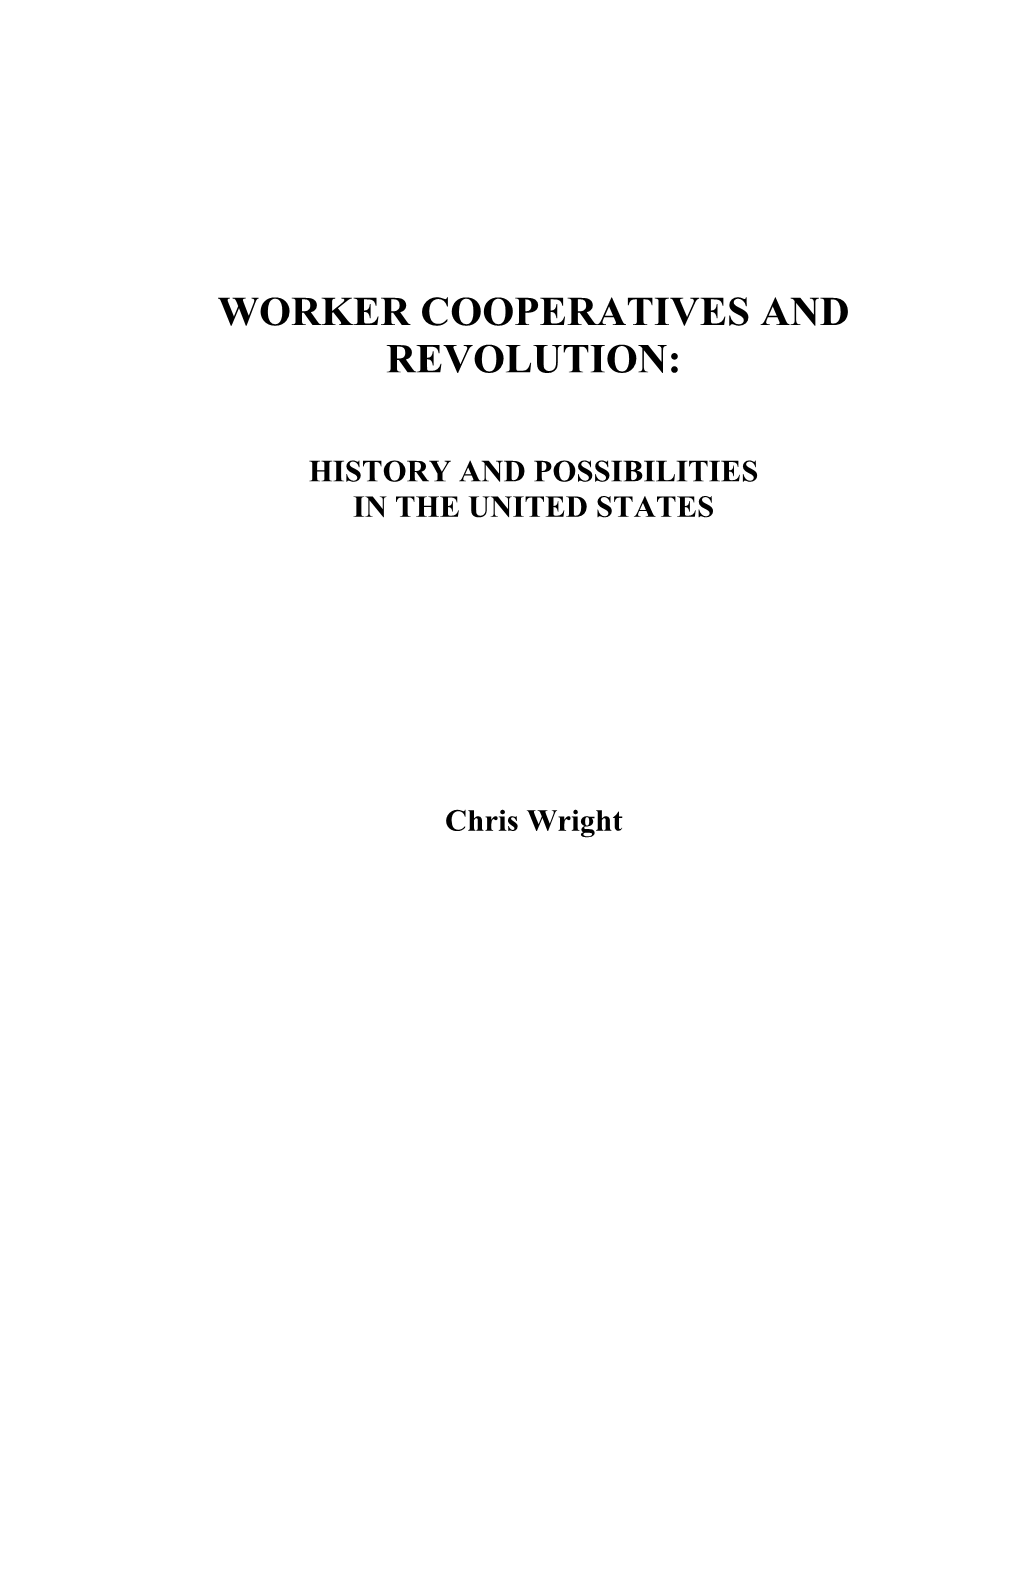 Worker Cooperatives and Revolution.Pdf